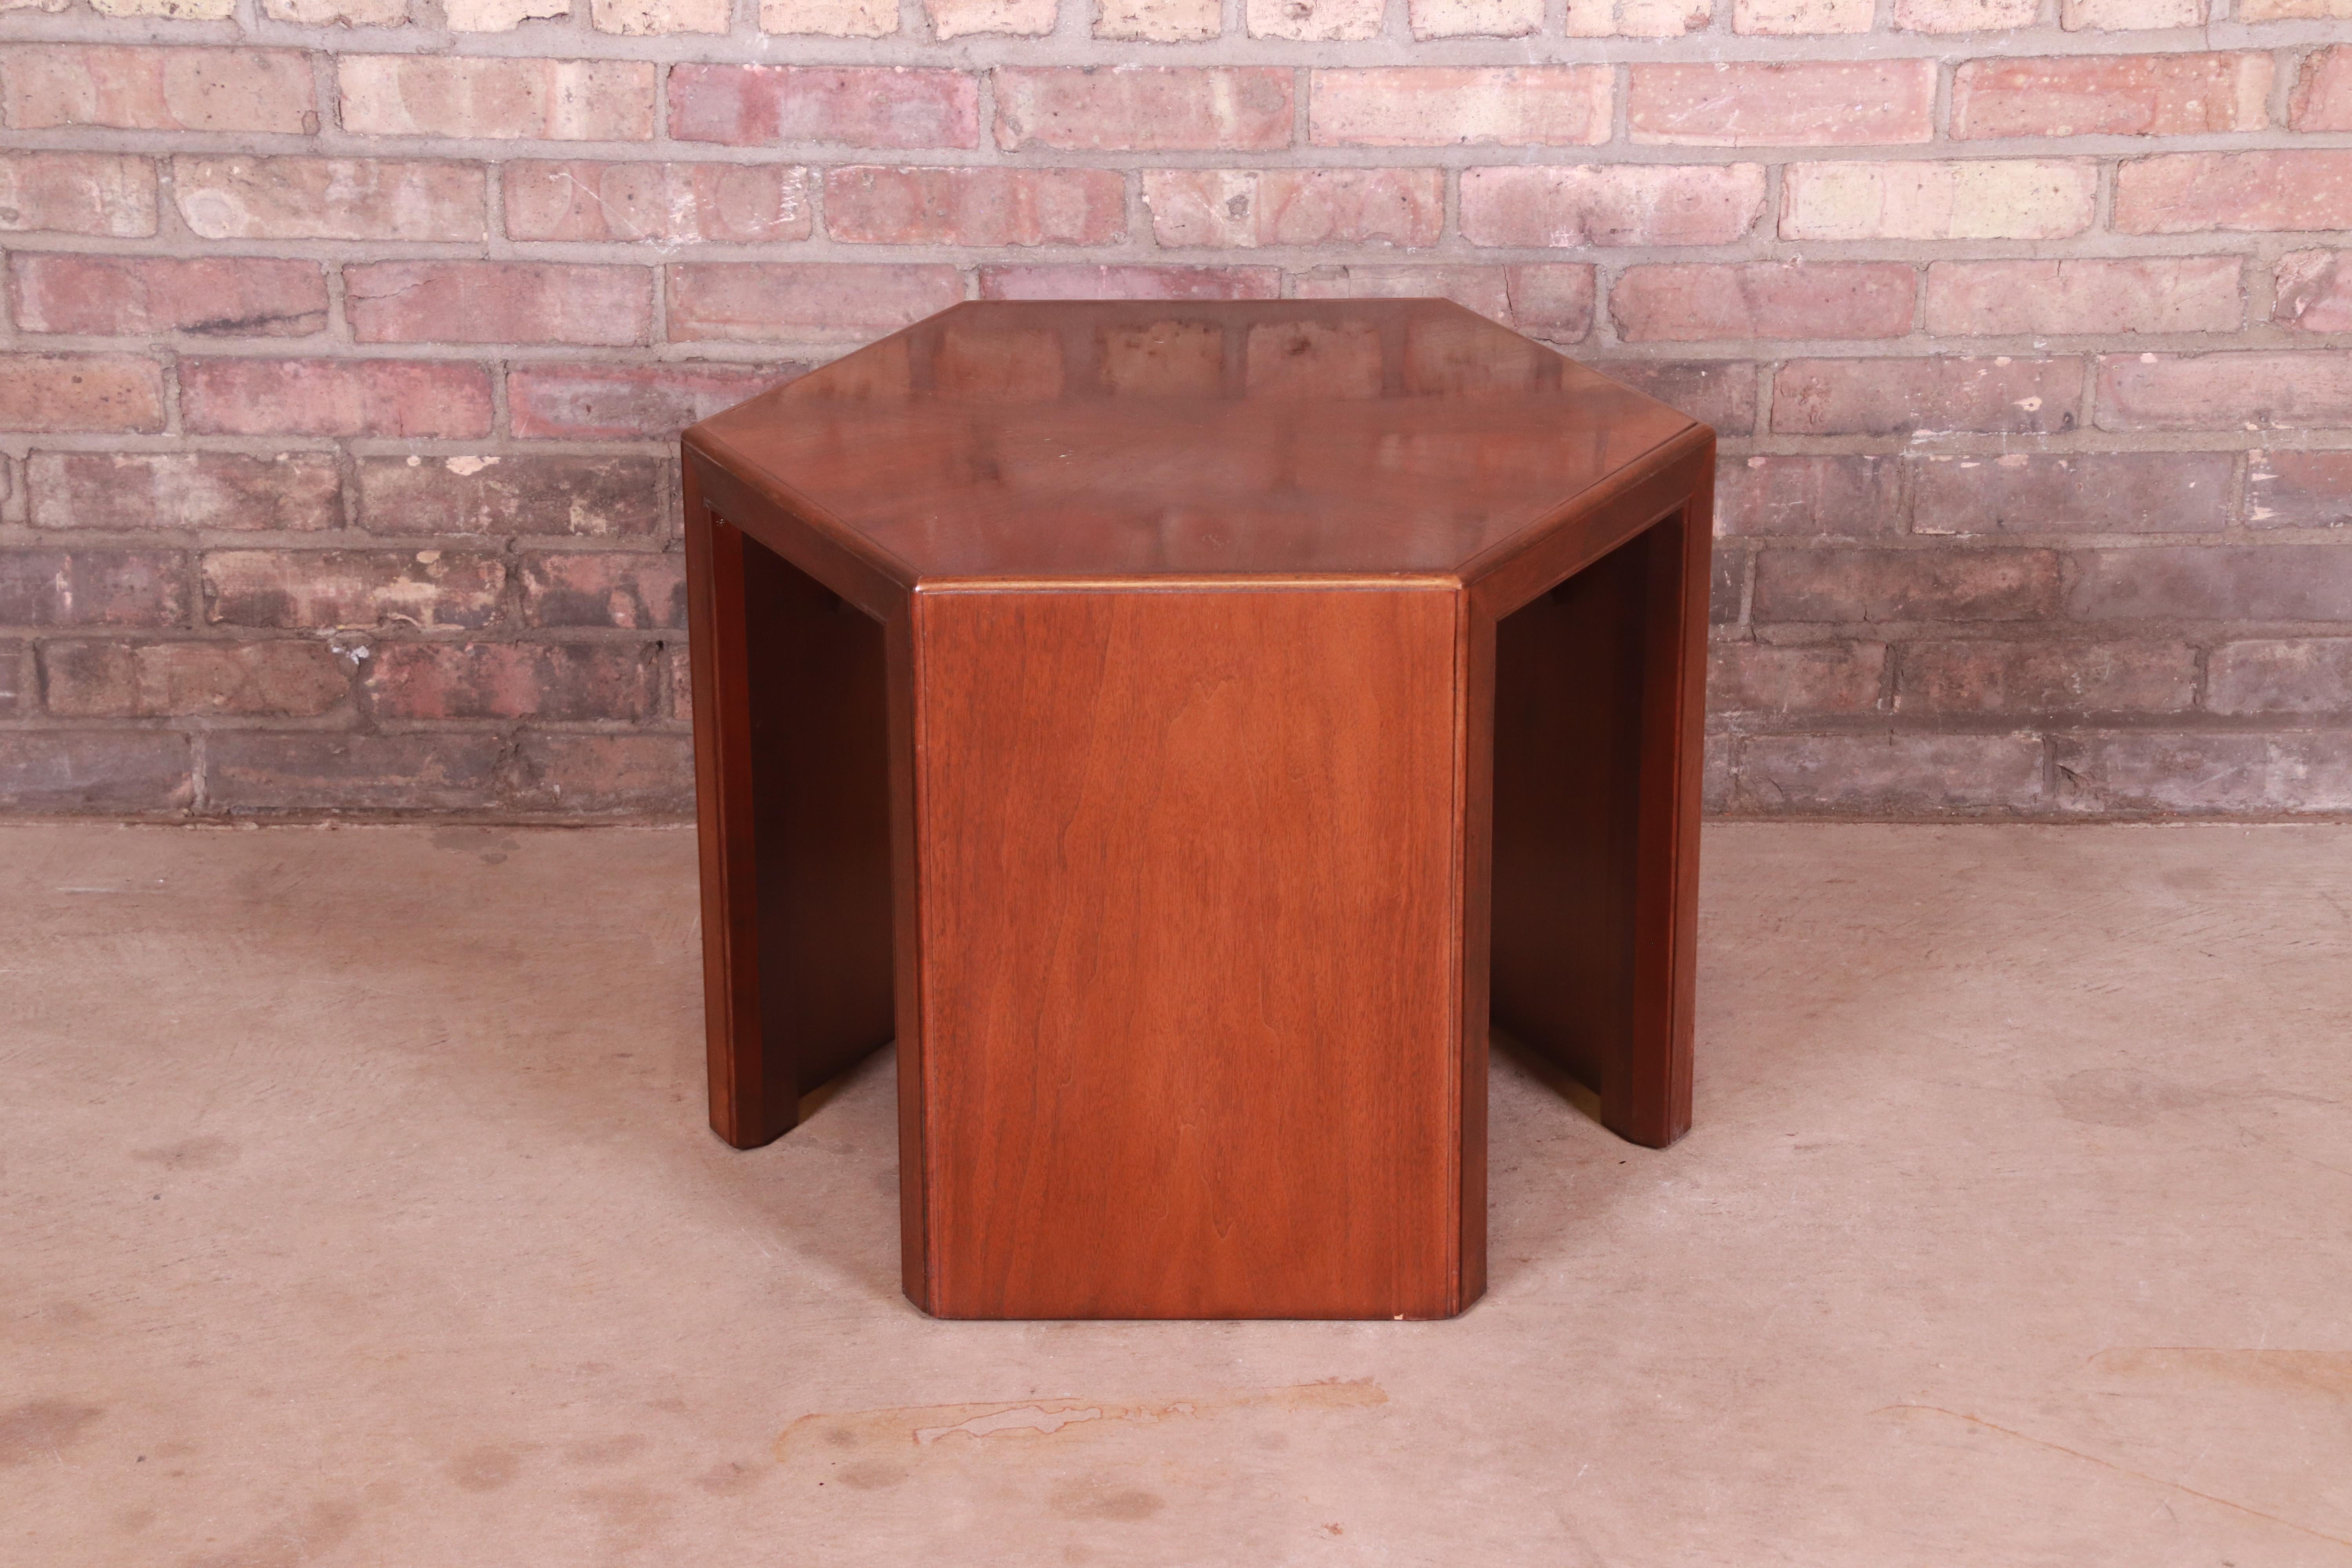 A stylish Mid-Century Modern walnut occasional side table

In the manner of Frank Lloyd Wright

By Baker Furniture

USA, Circa 1970s

Measures: 21